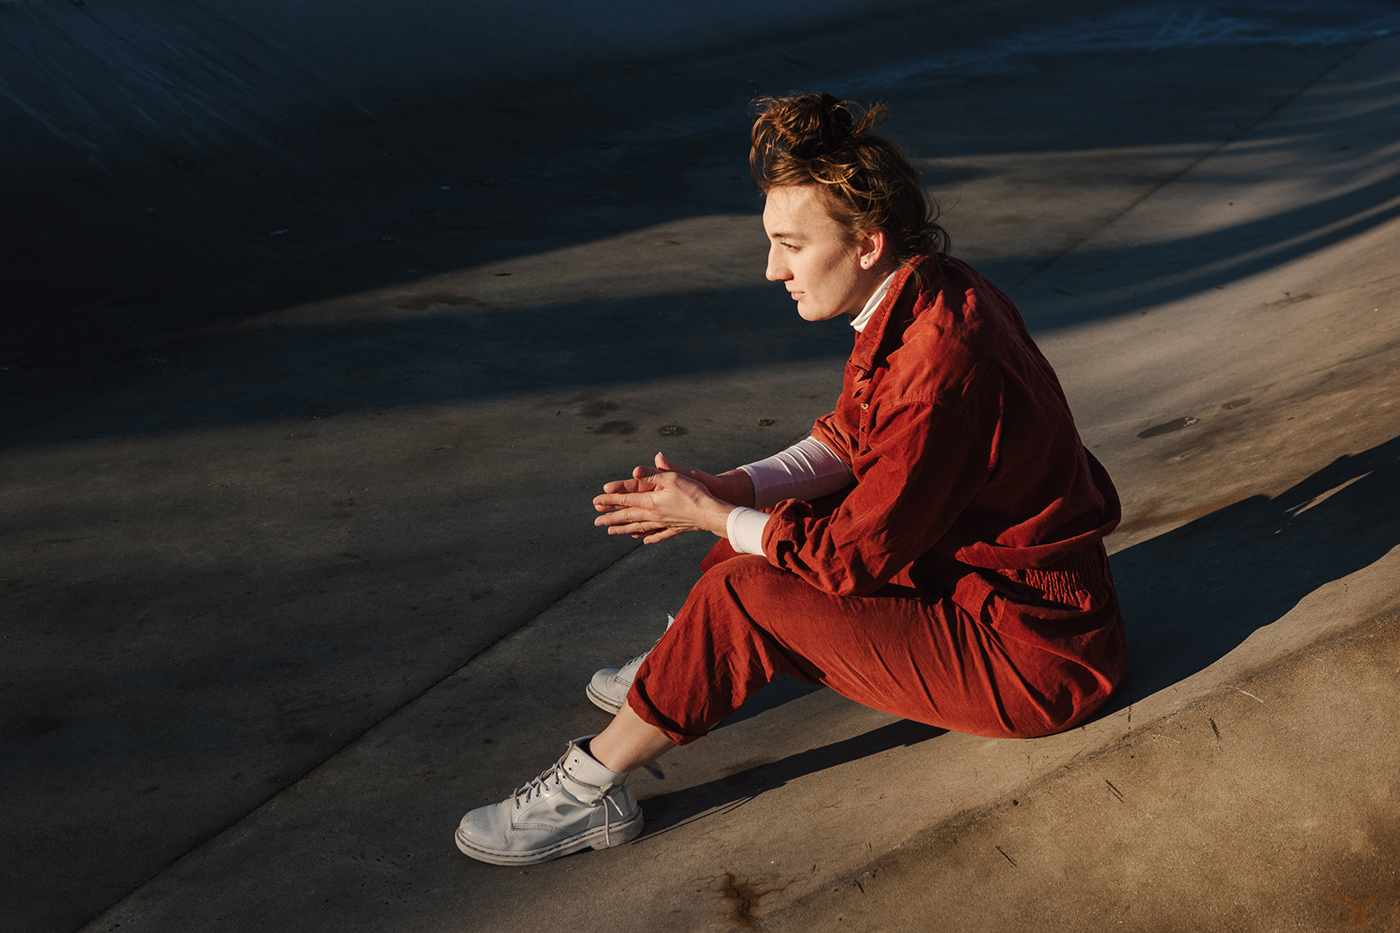 A person wearing a red jumpsuit is sitting on the pavement in the sunlight.